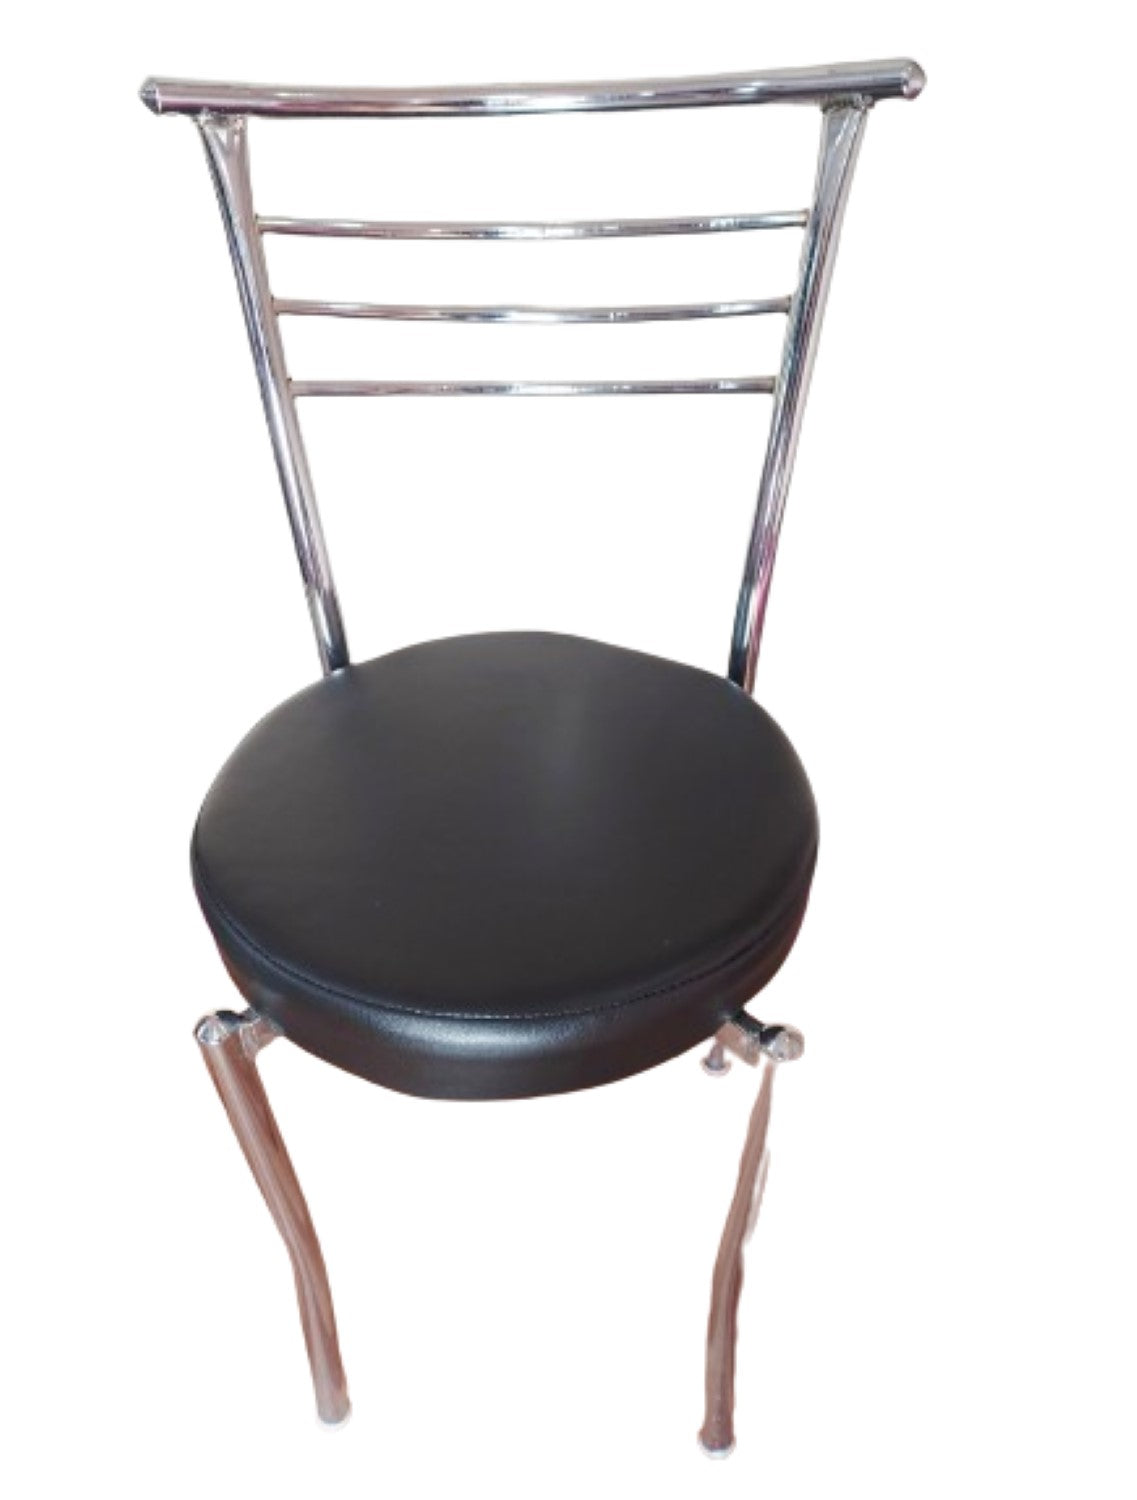 Bowzar Stainless Steel Chair 3 Wire with Cushion for Dining Restaurant